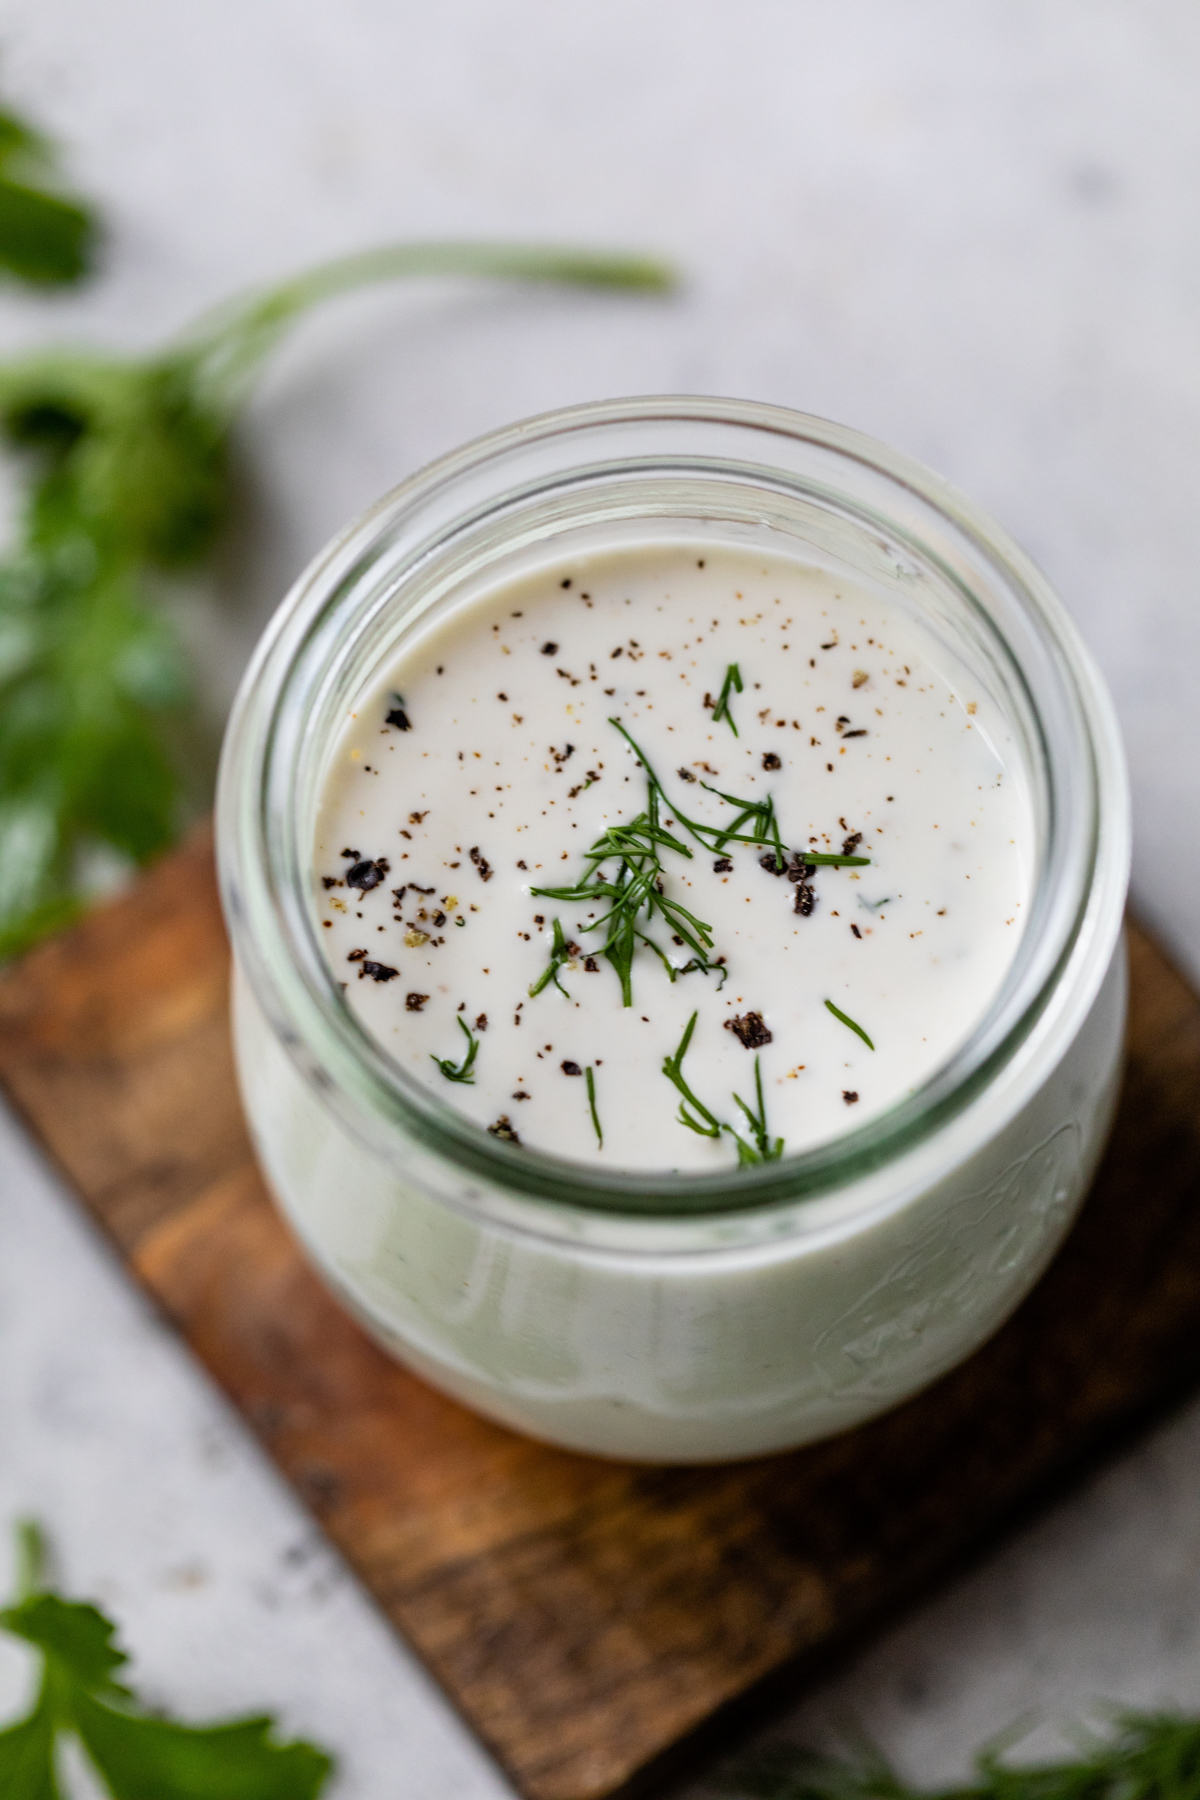 rich and creamy buttermilk dressing in a small glass jar